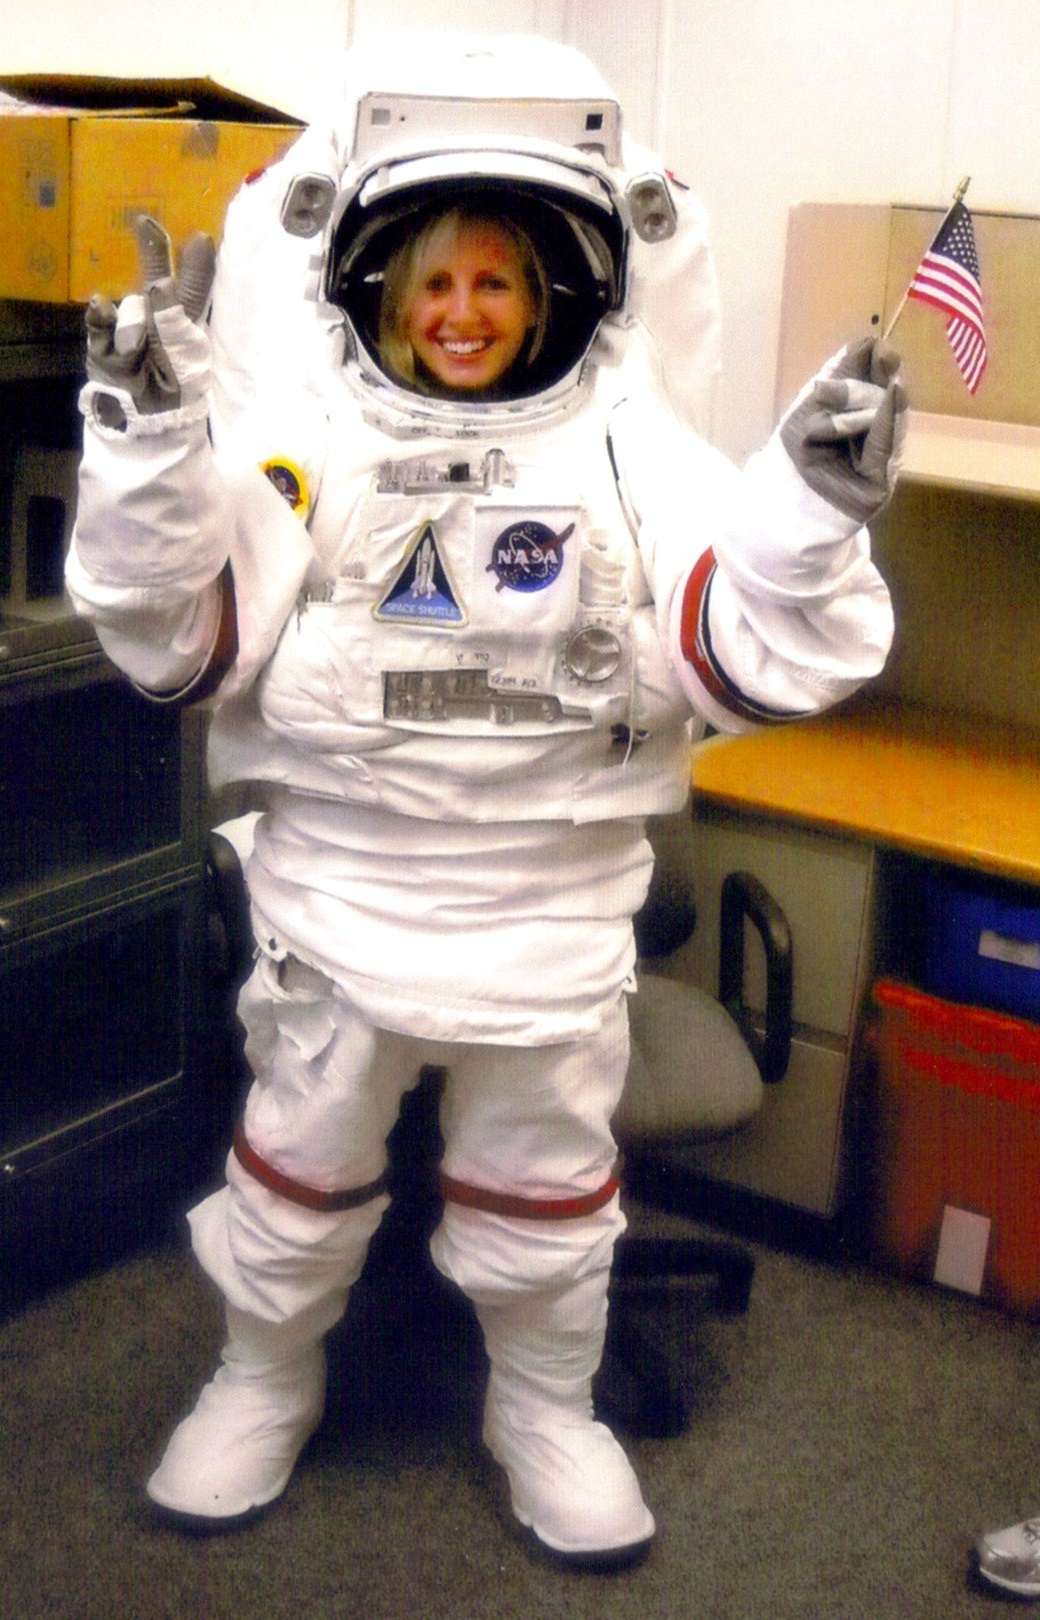 While serving as a NASA Co-op student at the Kennedy Space Center in 2009, Annie Caraccio had an opportunity to try on a replica extravehicular mobility unit, the pressure suit used by astronauts during spacewalks.